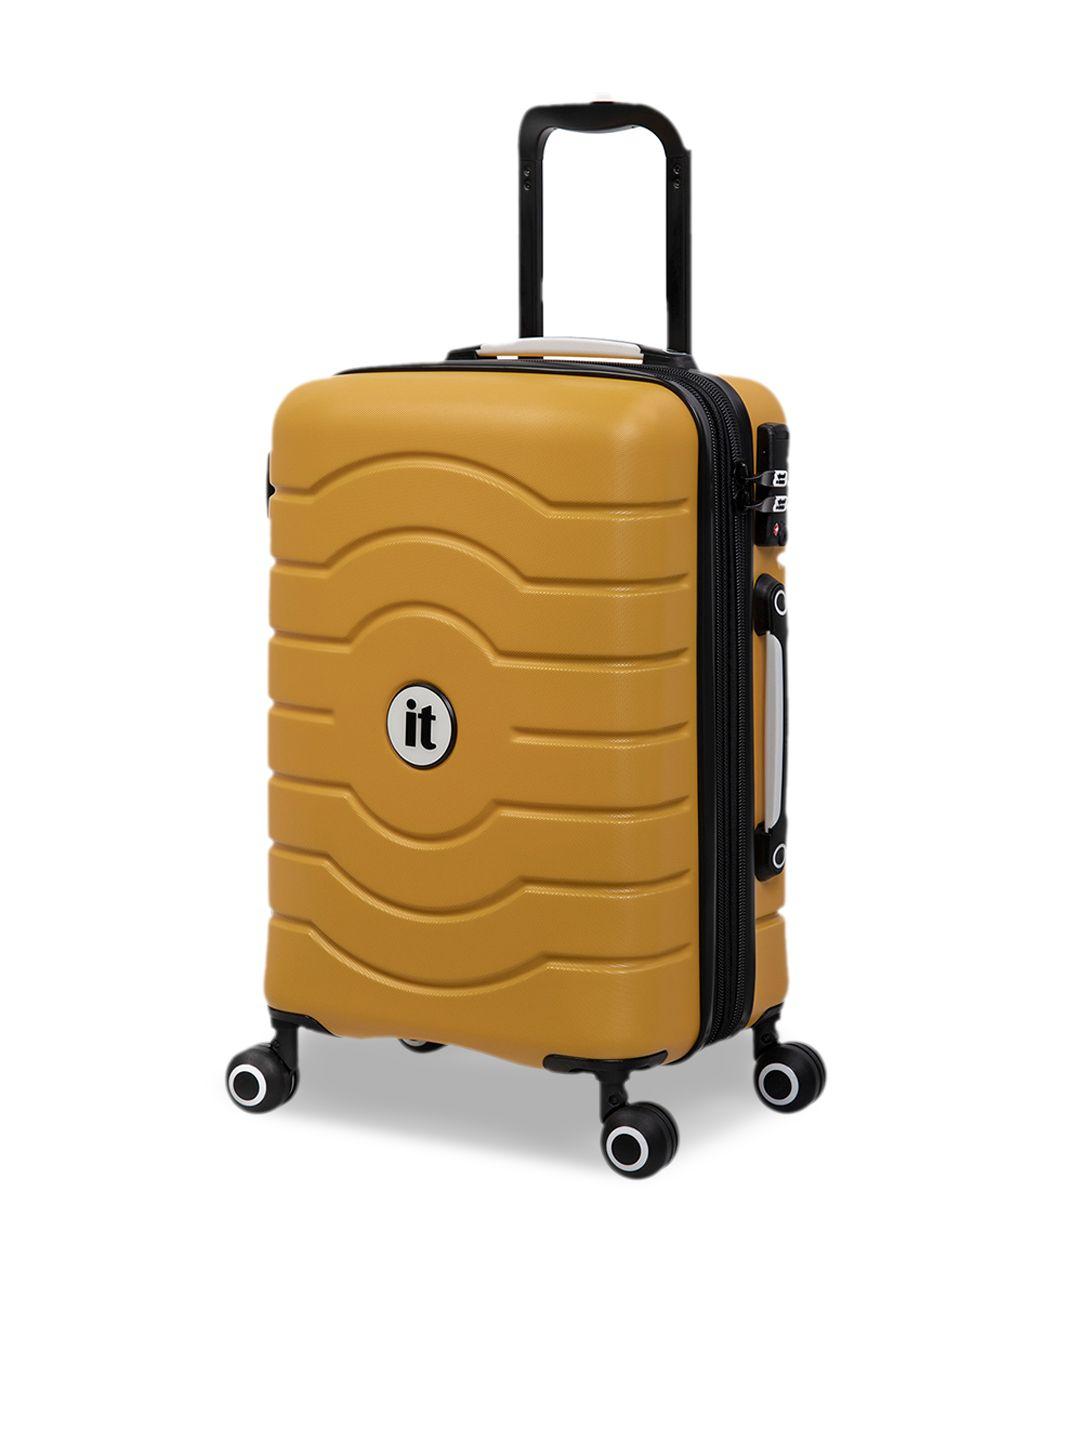 it luggage yellow textured hard-sided trolley bag